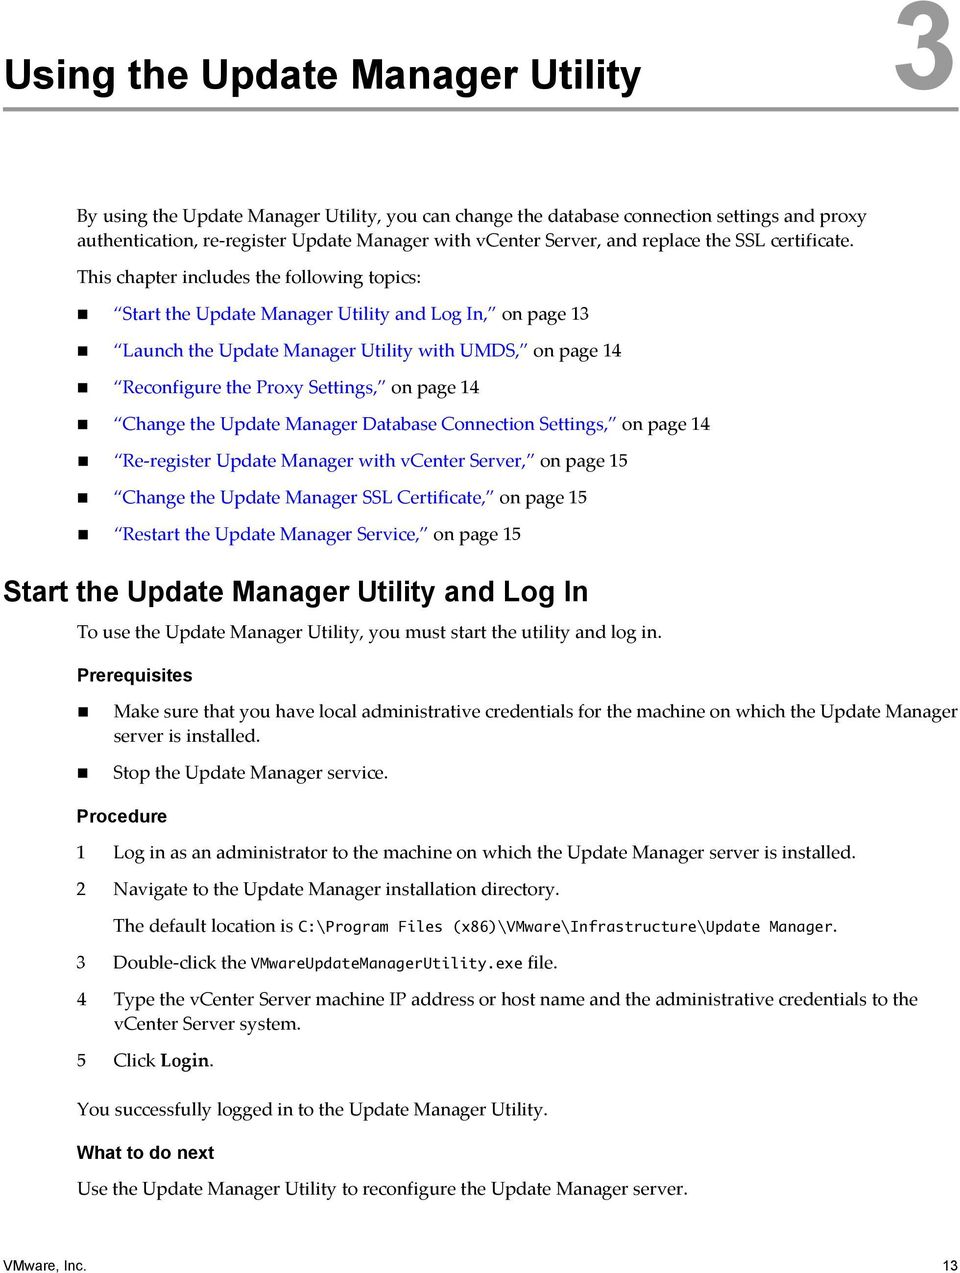 This chapter includes the following topics: Start the Update Manager Utility and Log In, on page 13 Launch the Update Manager Utility with UMDS, on page 14 Reconfigure the Proxy Settings, on page 14